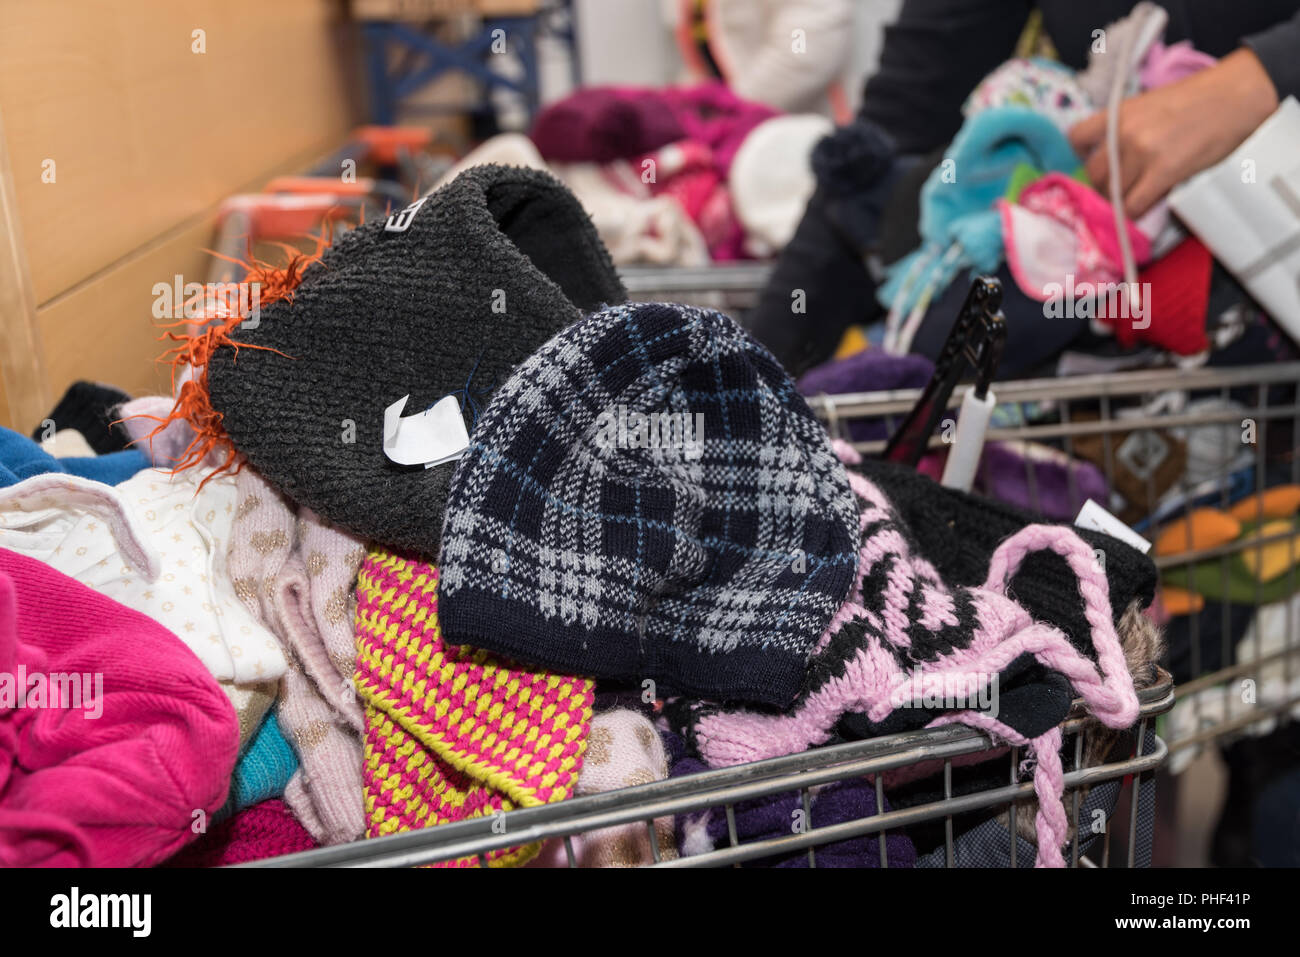 Clothes flea market offers suitable and affordable children's clothing Stock Photo